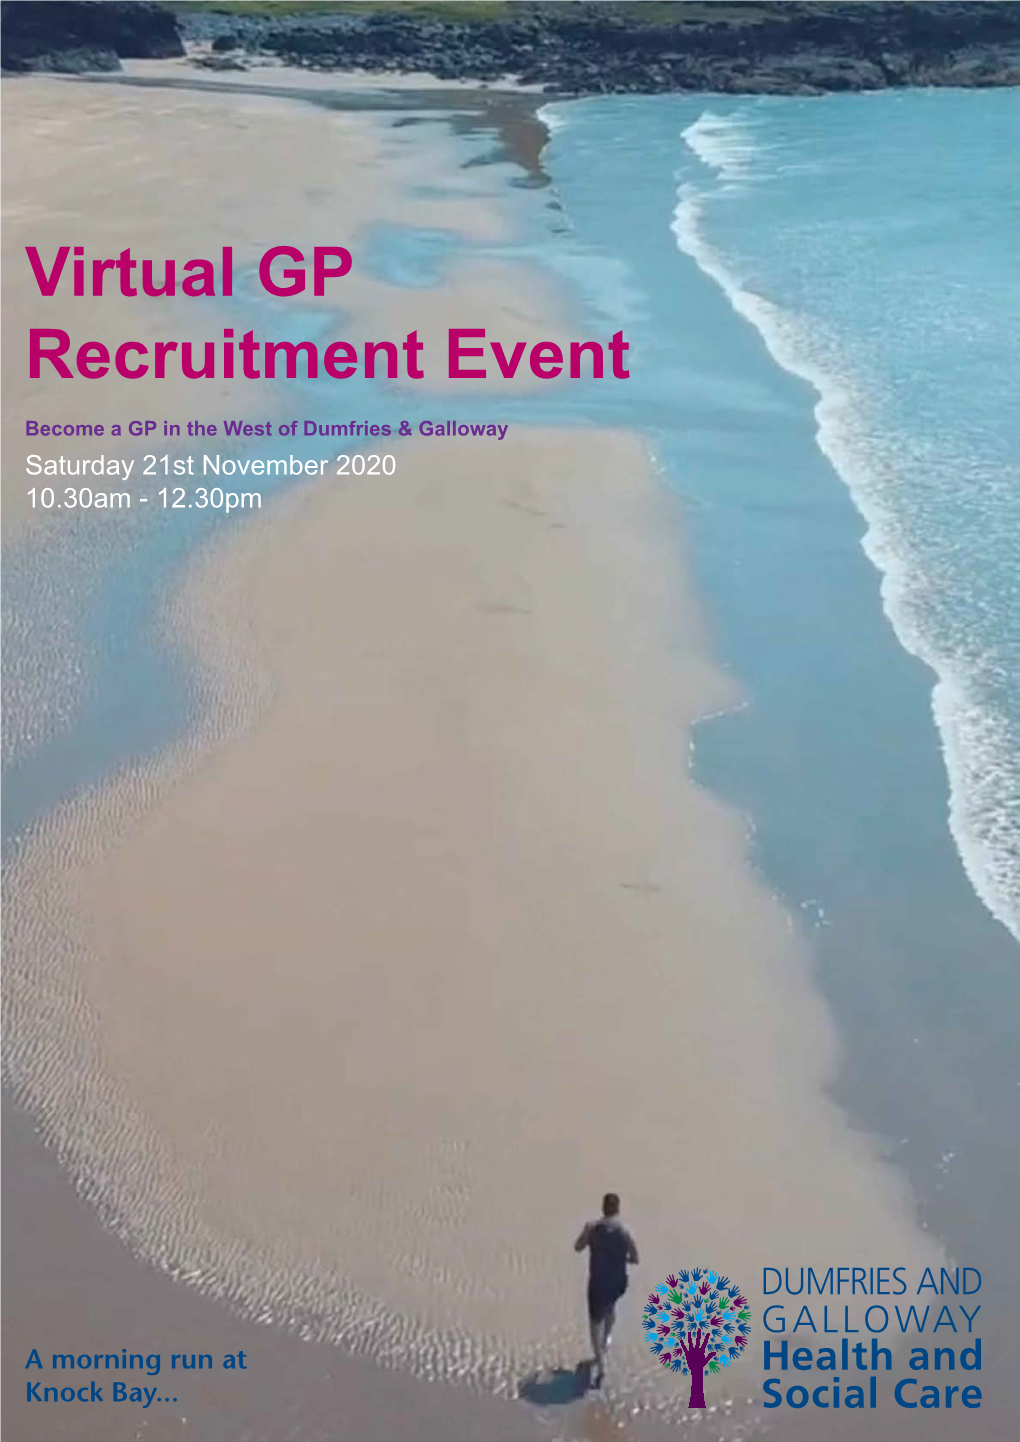 Virtual GP Recruitment Event Become a GP in the West of Dumfries & Galloway Saturday 21St November 2020 10.30Am - 12.30Pm